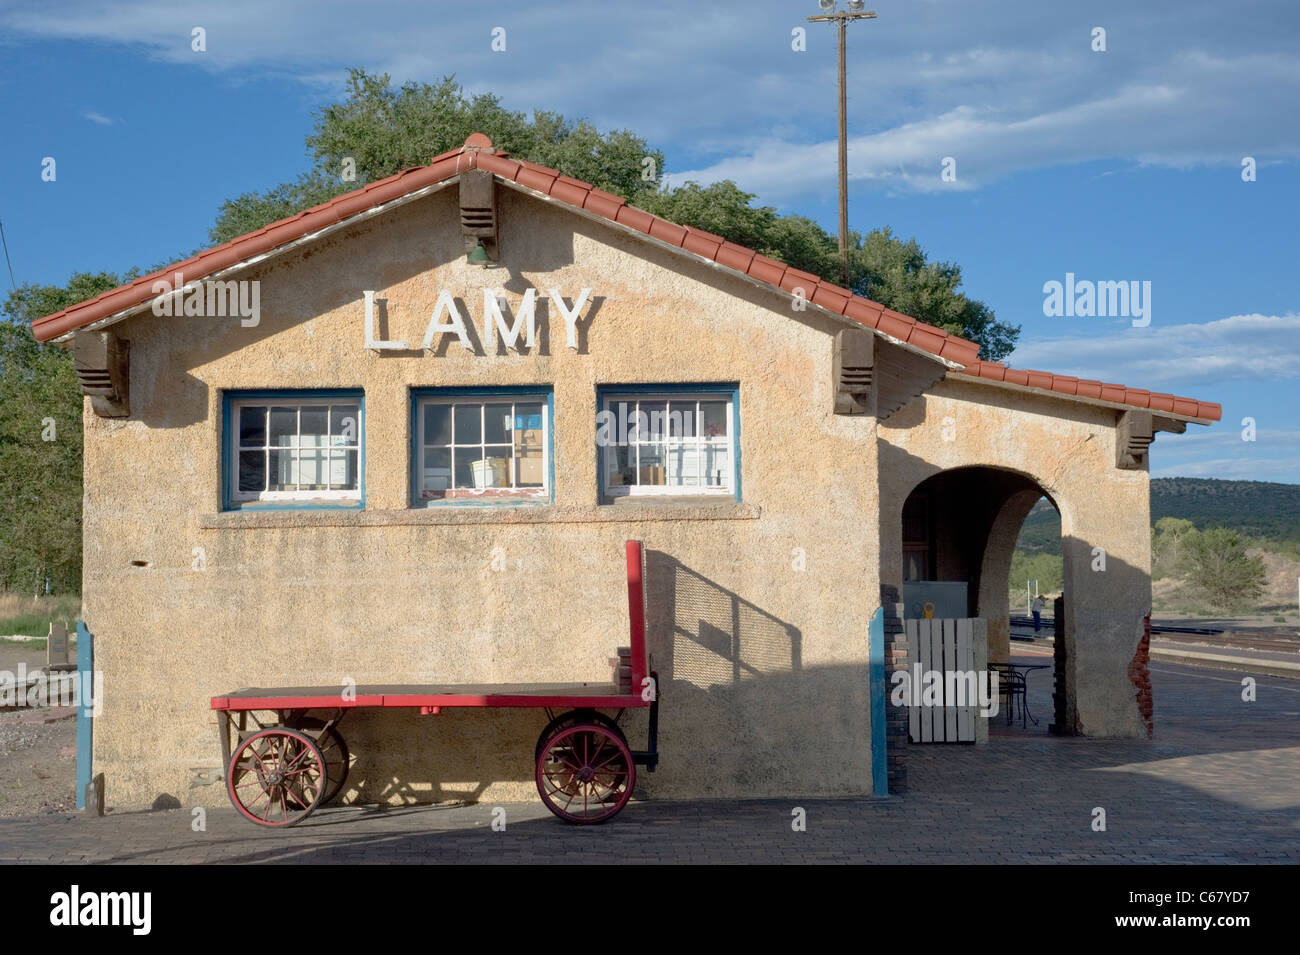 Lamy Amtrak station, built in 1909 by the Atchison, Topeka and Santa Fe Railway, terminus for the Santa Fe Southern Railway. Stock Photo